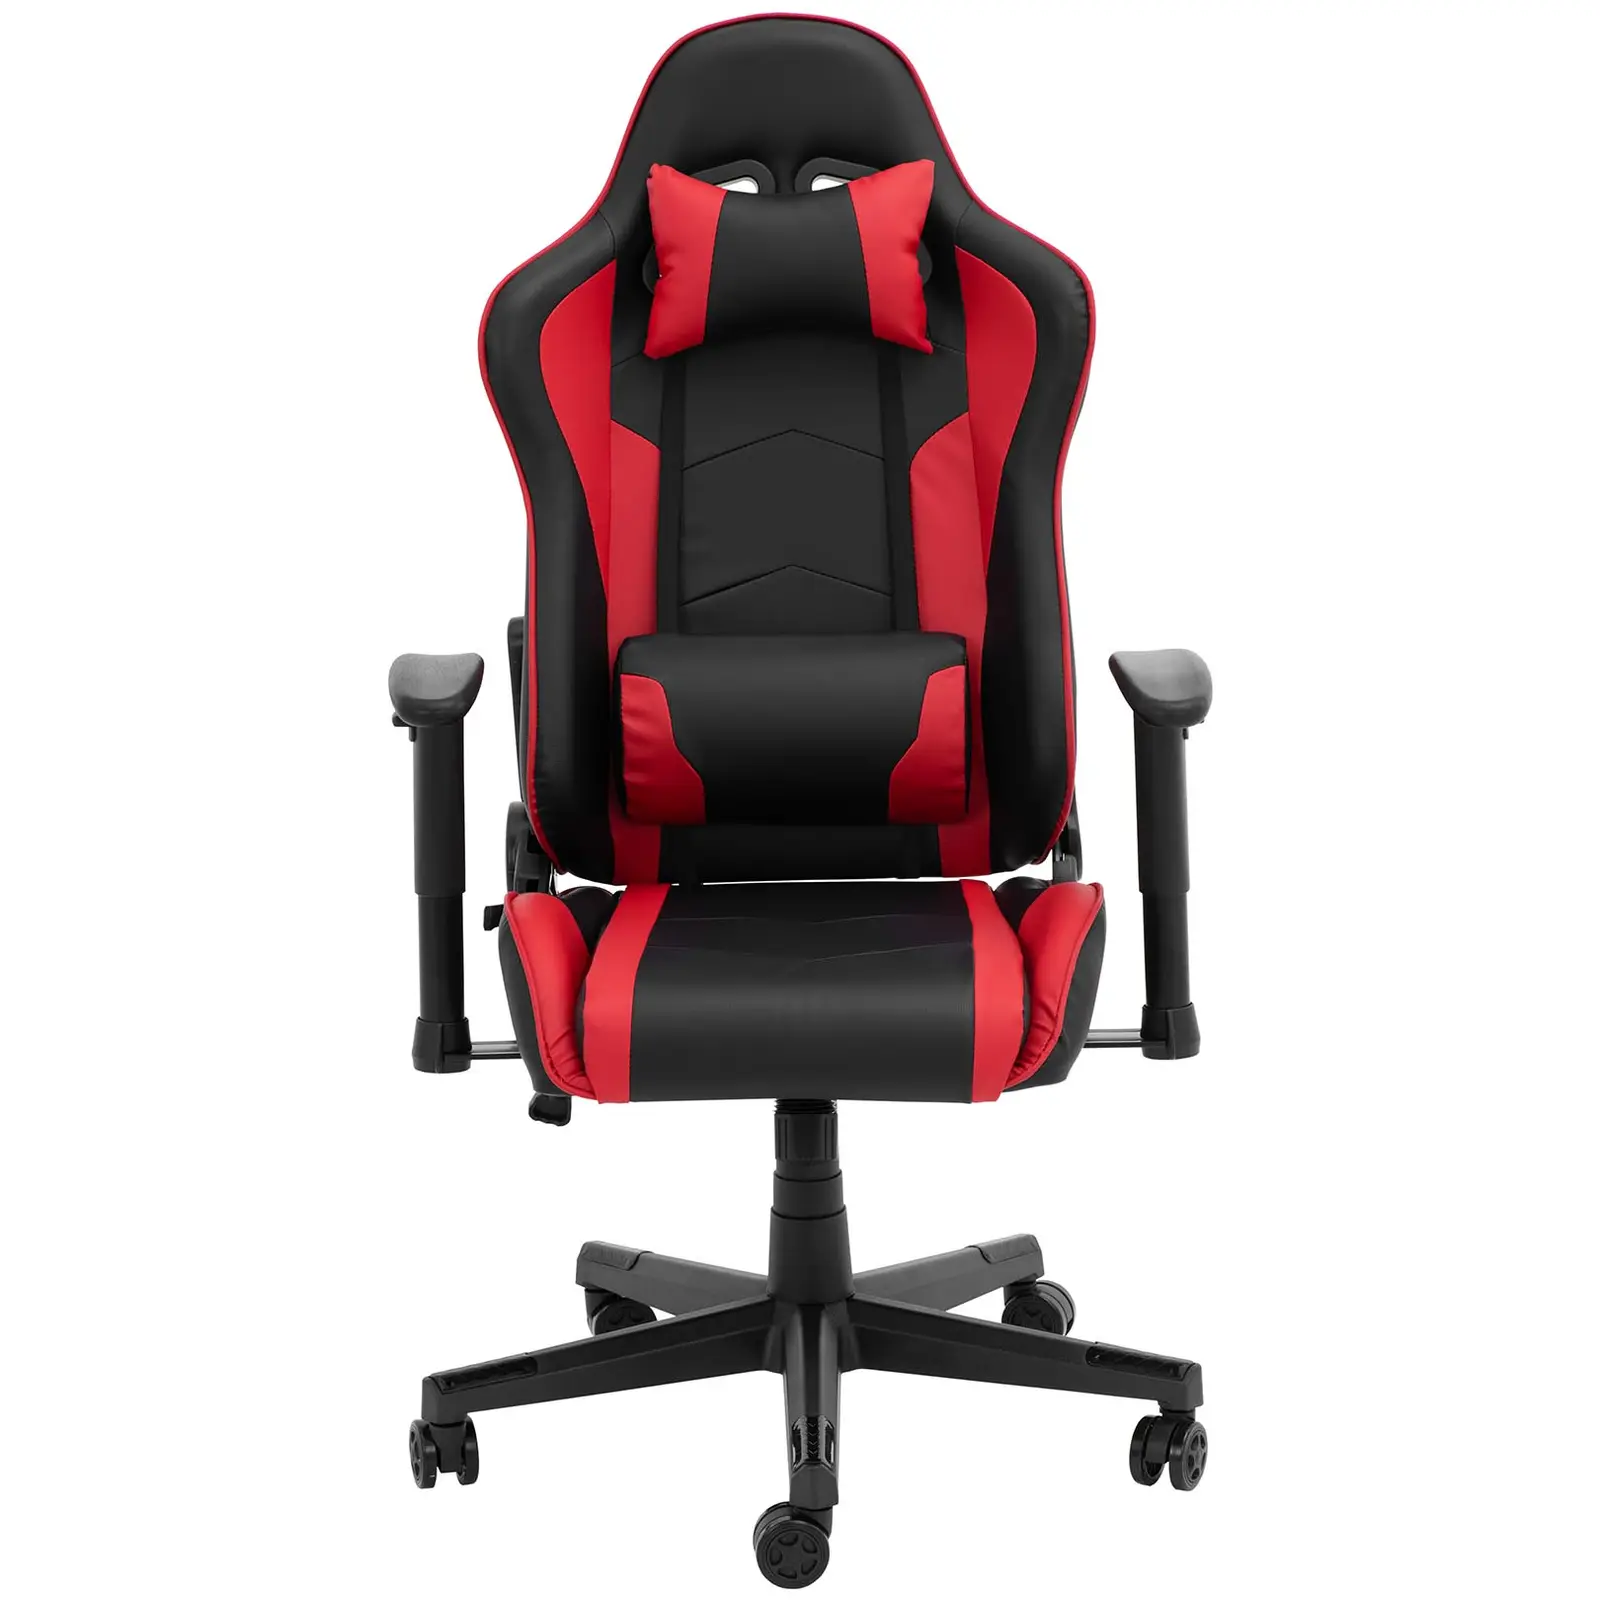 Gaming Chair - with armrests - adjustable height / backrest - incl. neck and lumbar support